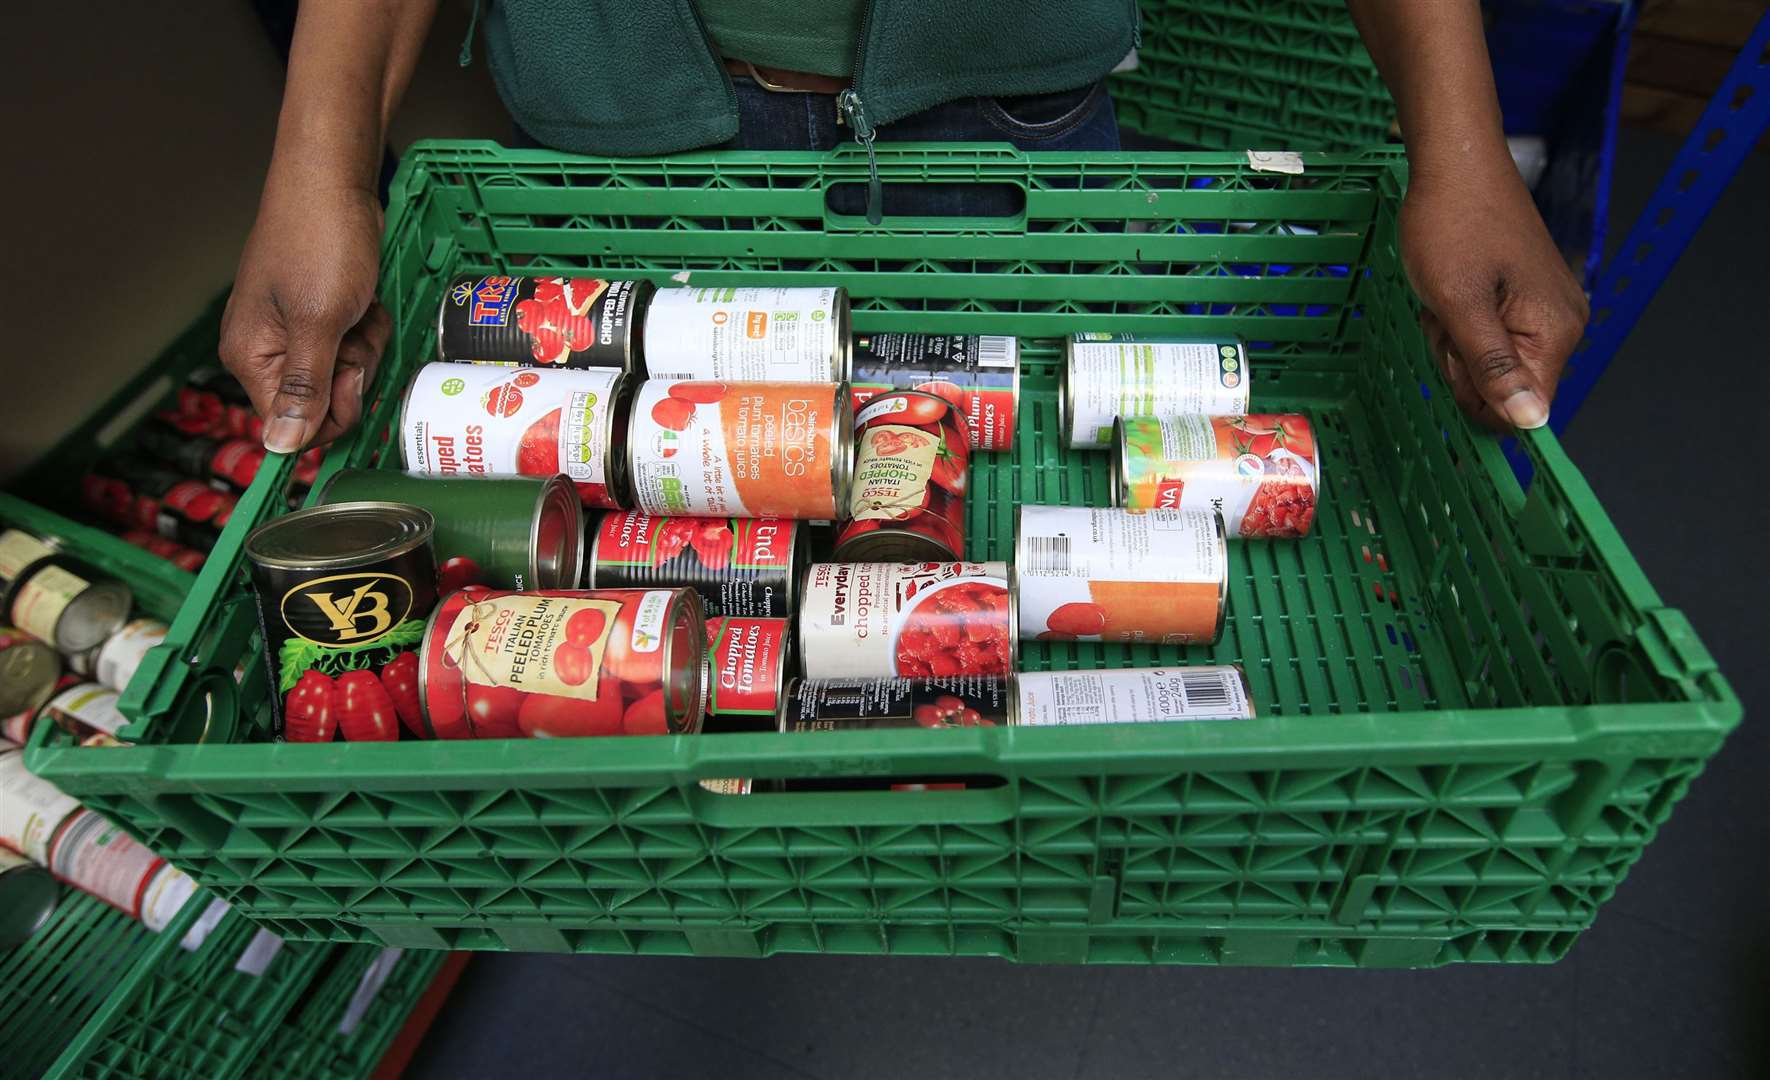 Increased food prices have pushed UK families towards relying more on food banks (Jonathan Brady/PA)